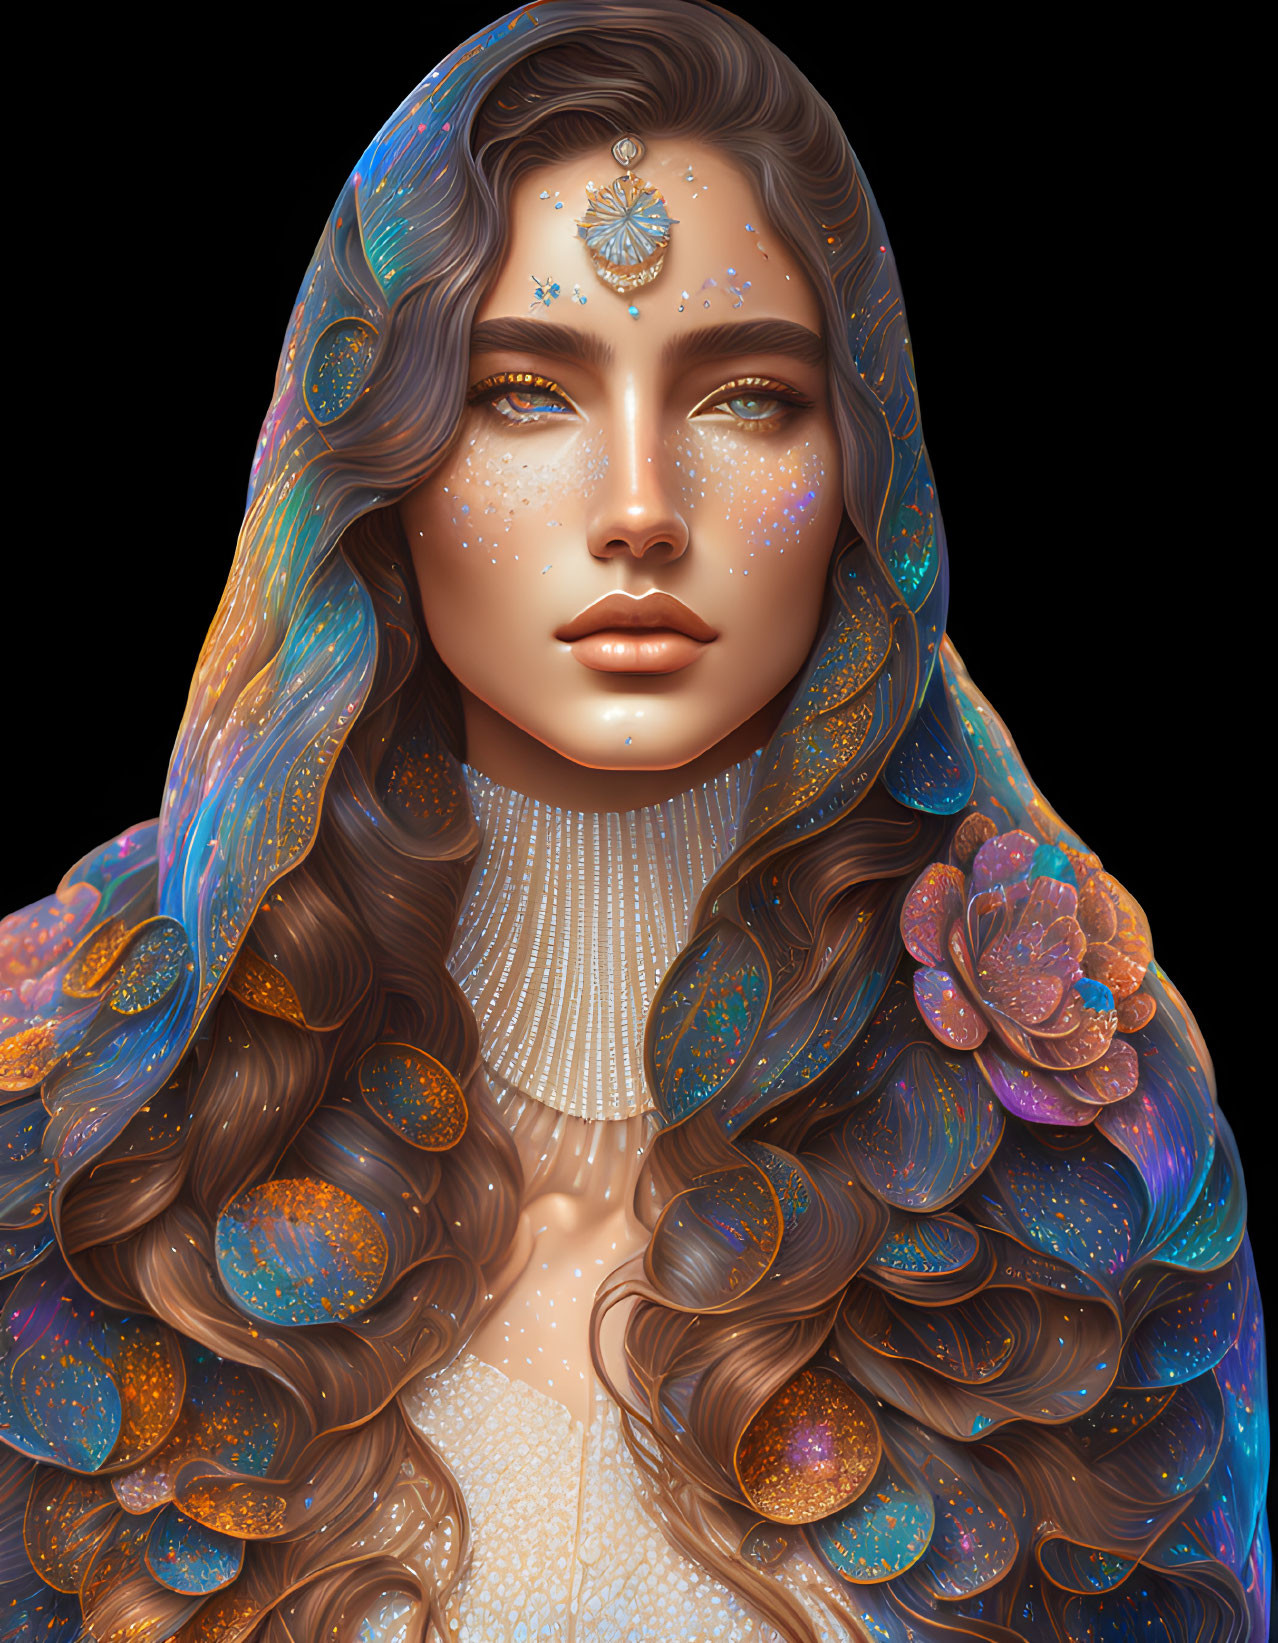 Illustrated woman with galaxy-themed makeup and cosmic attire.